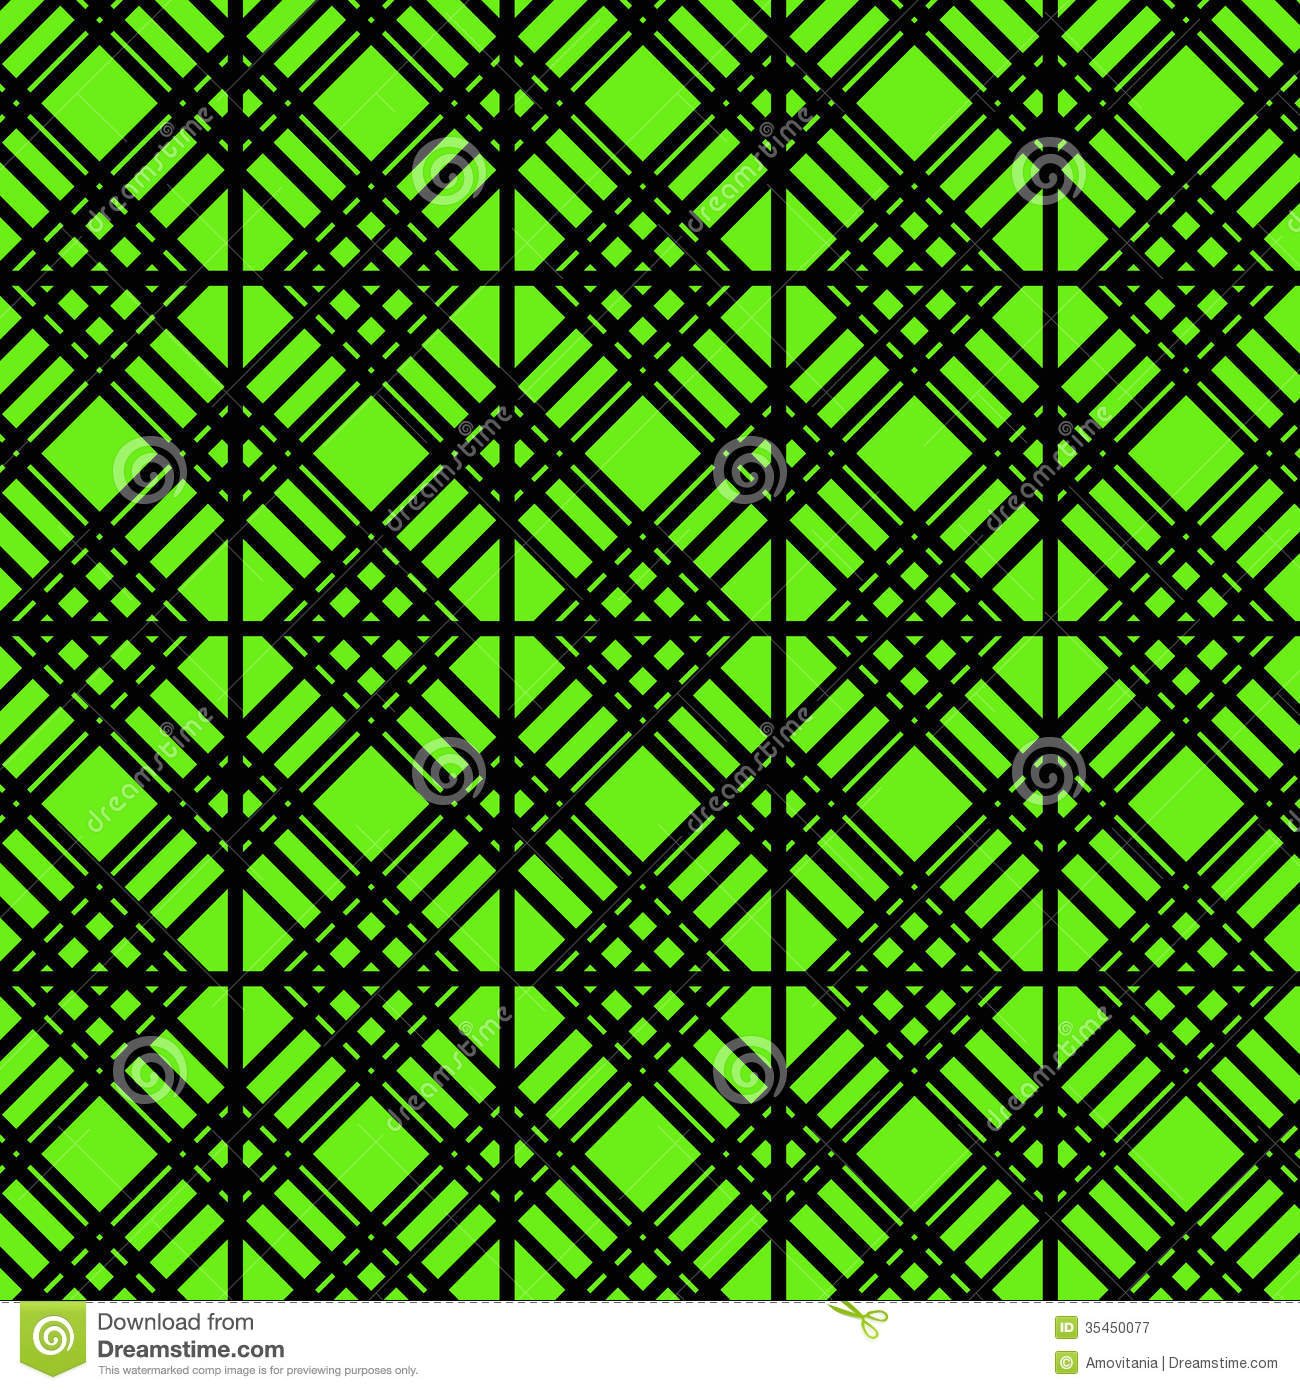 Contour Geometric Pattern On Green Background Royalty Free Stock